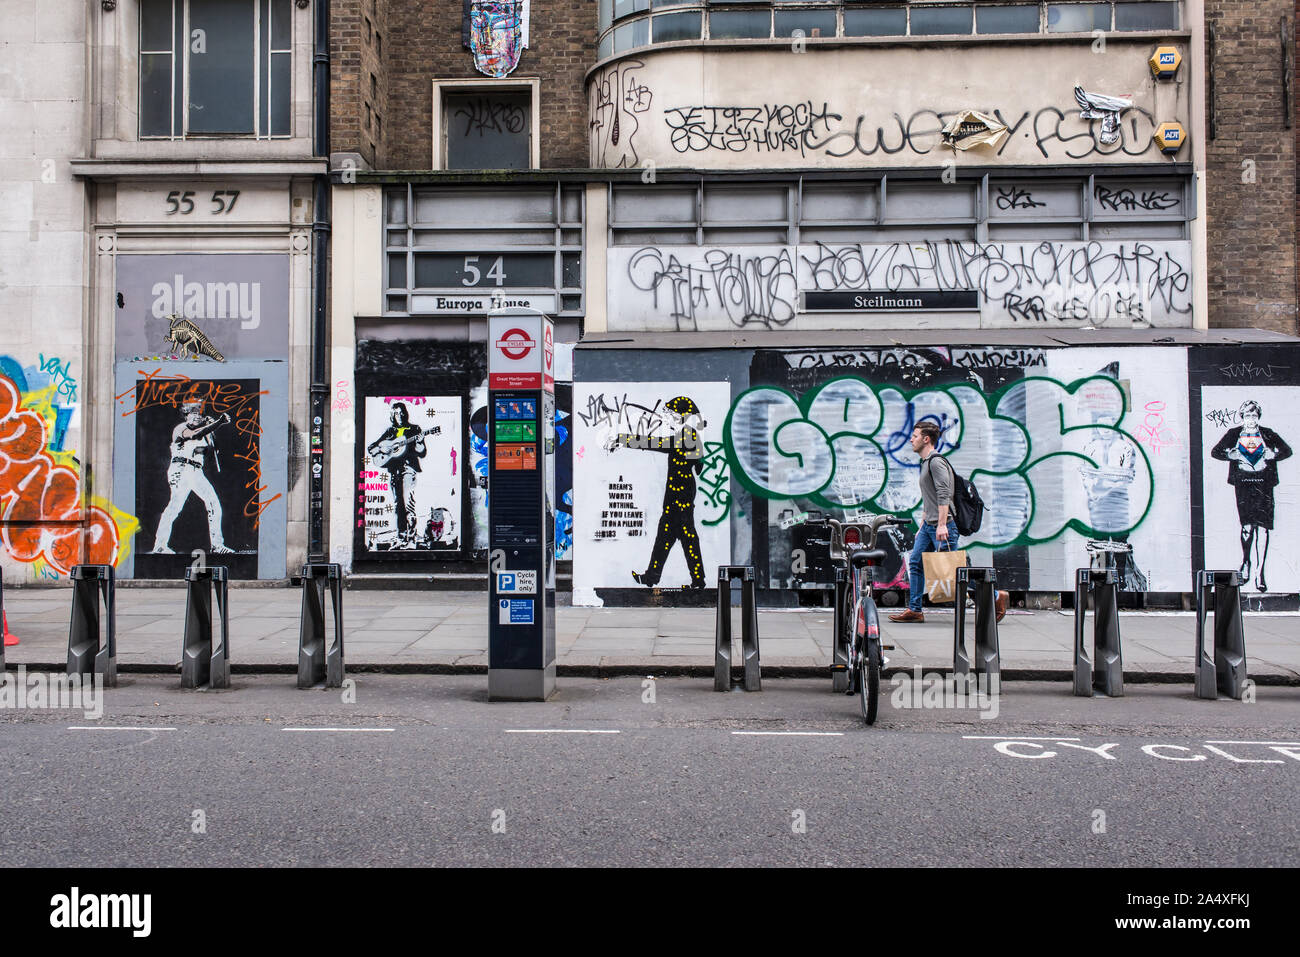 People walking in Great Marlborough Street, Soho in front of walls covered in graffiti murals and street art Stock Photo